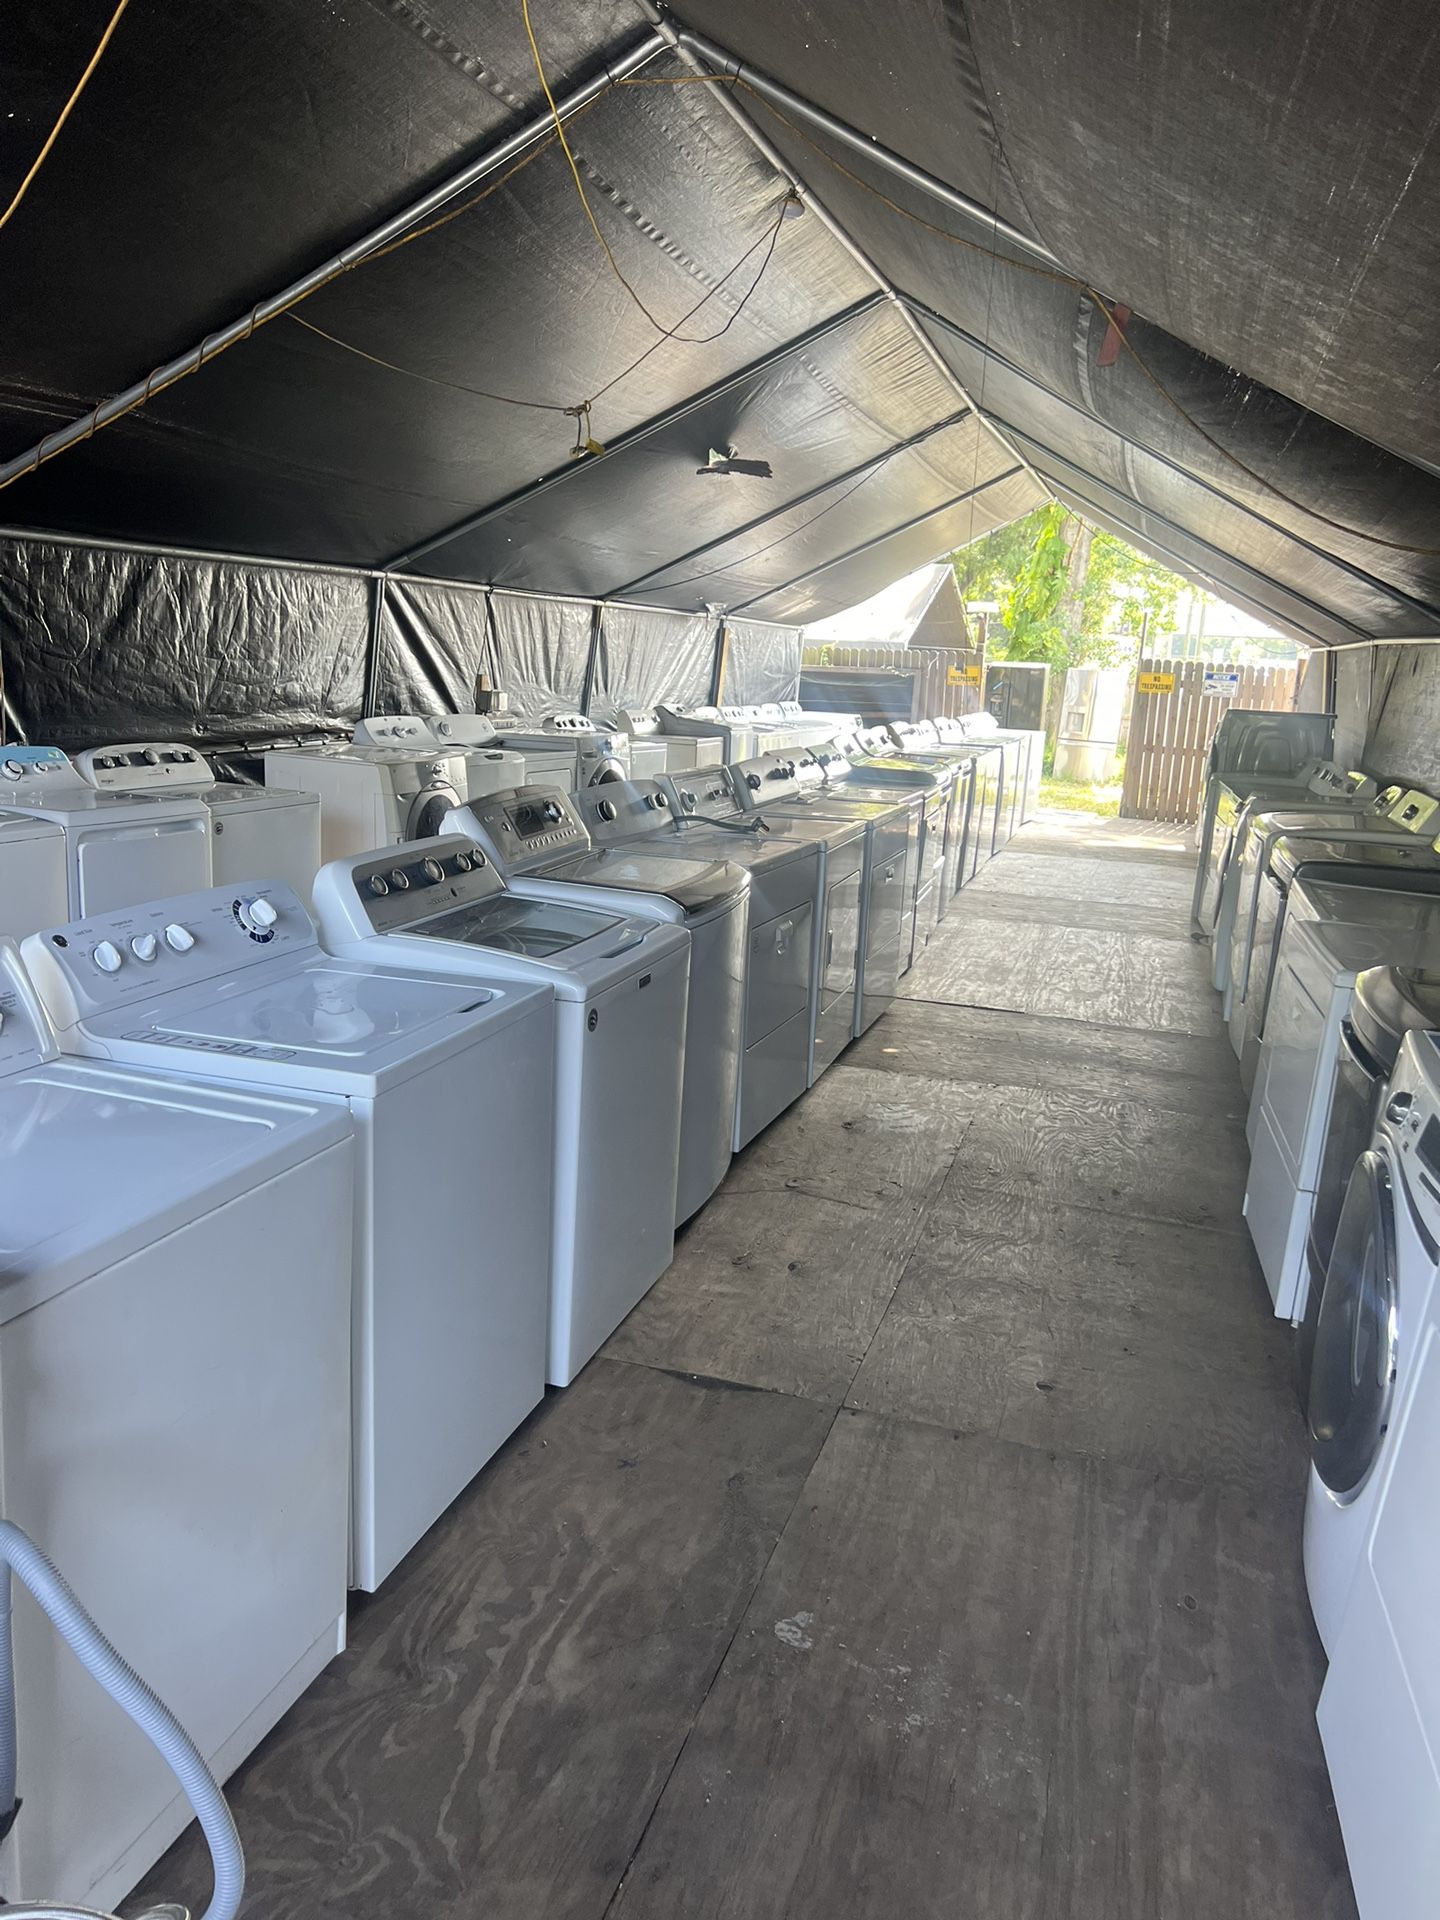 Washer&dryer Large Capacity Delivery  Available   60 day warranty/ Located at:📍5415 Carmack Rd Tampa Fl 33610📍 